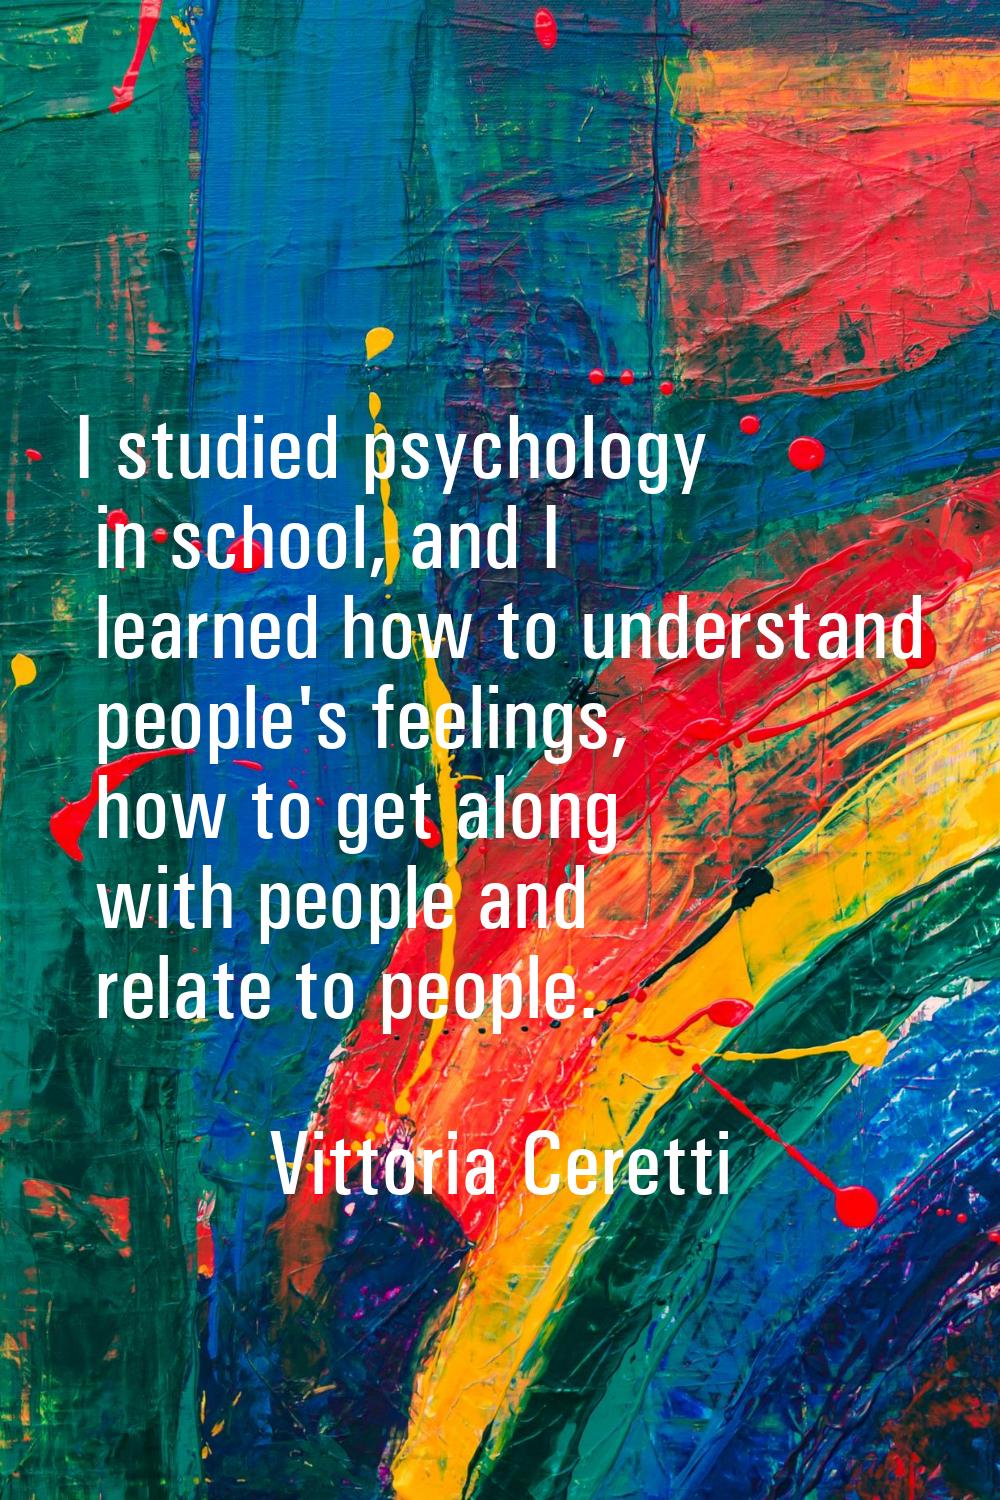 I studied psychology in school, and I learned how to understand people's feelings, how to get along